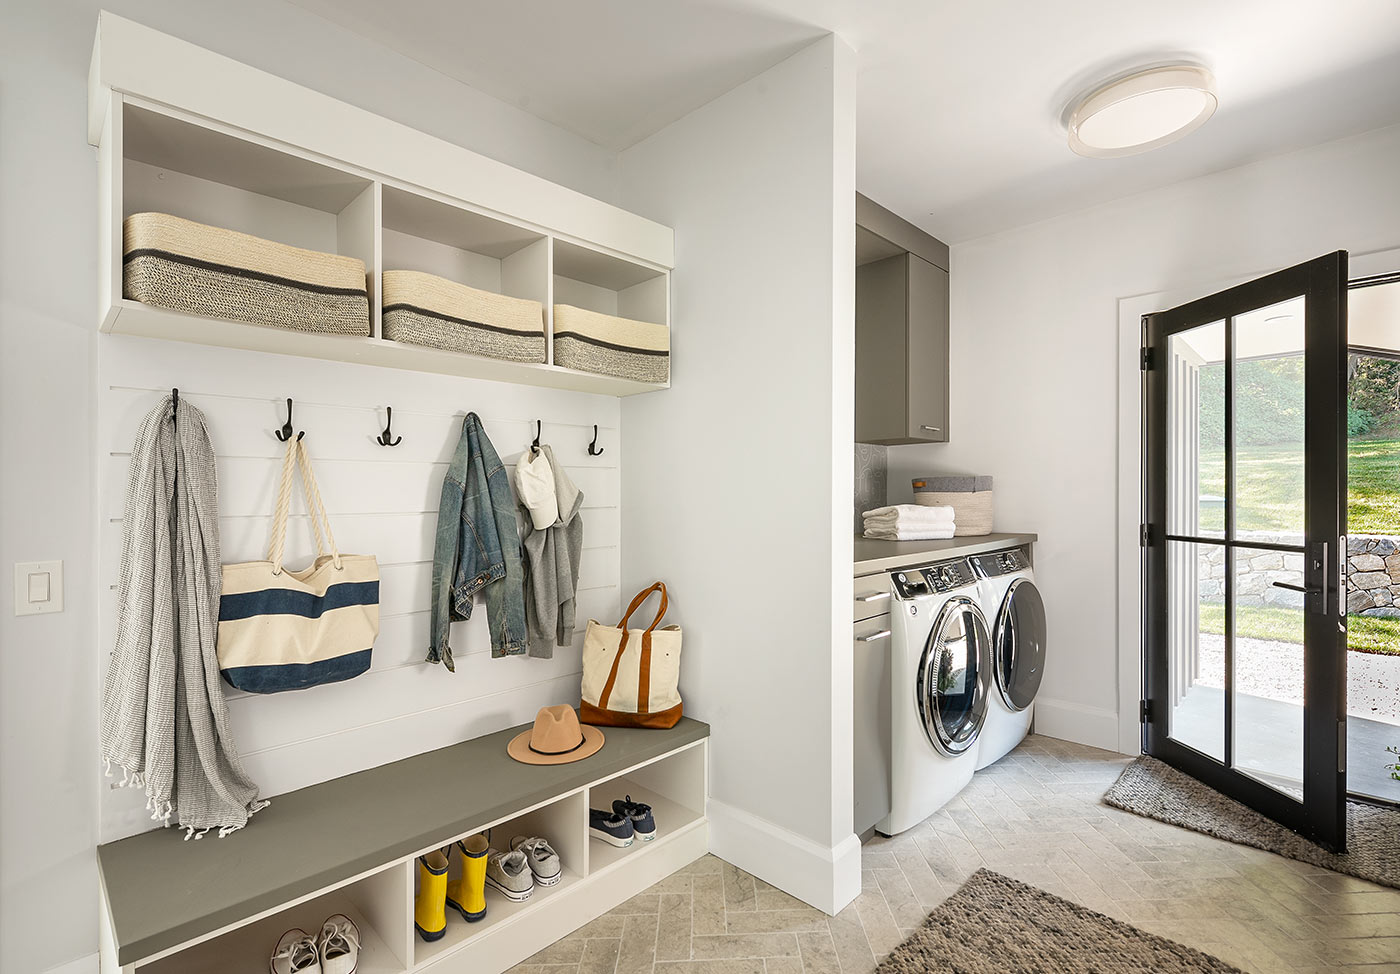 Shiplap wall accent elevates the laundry room.